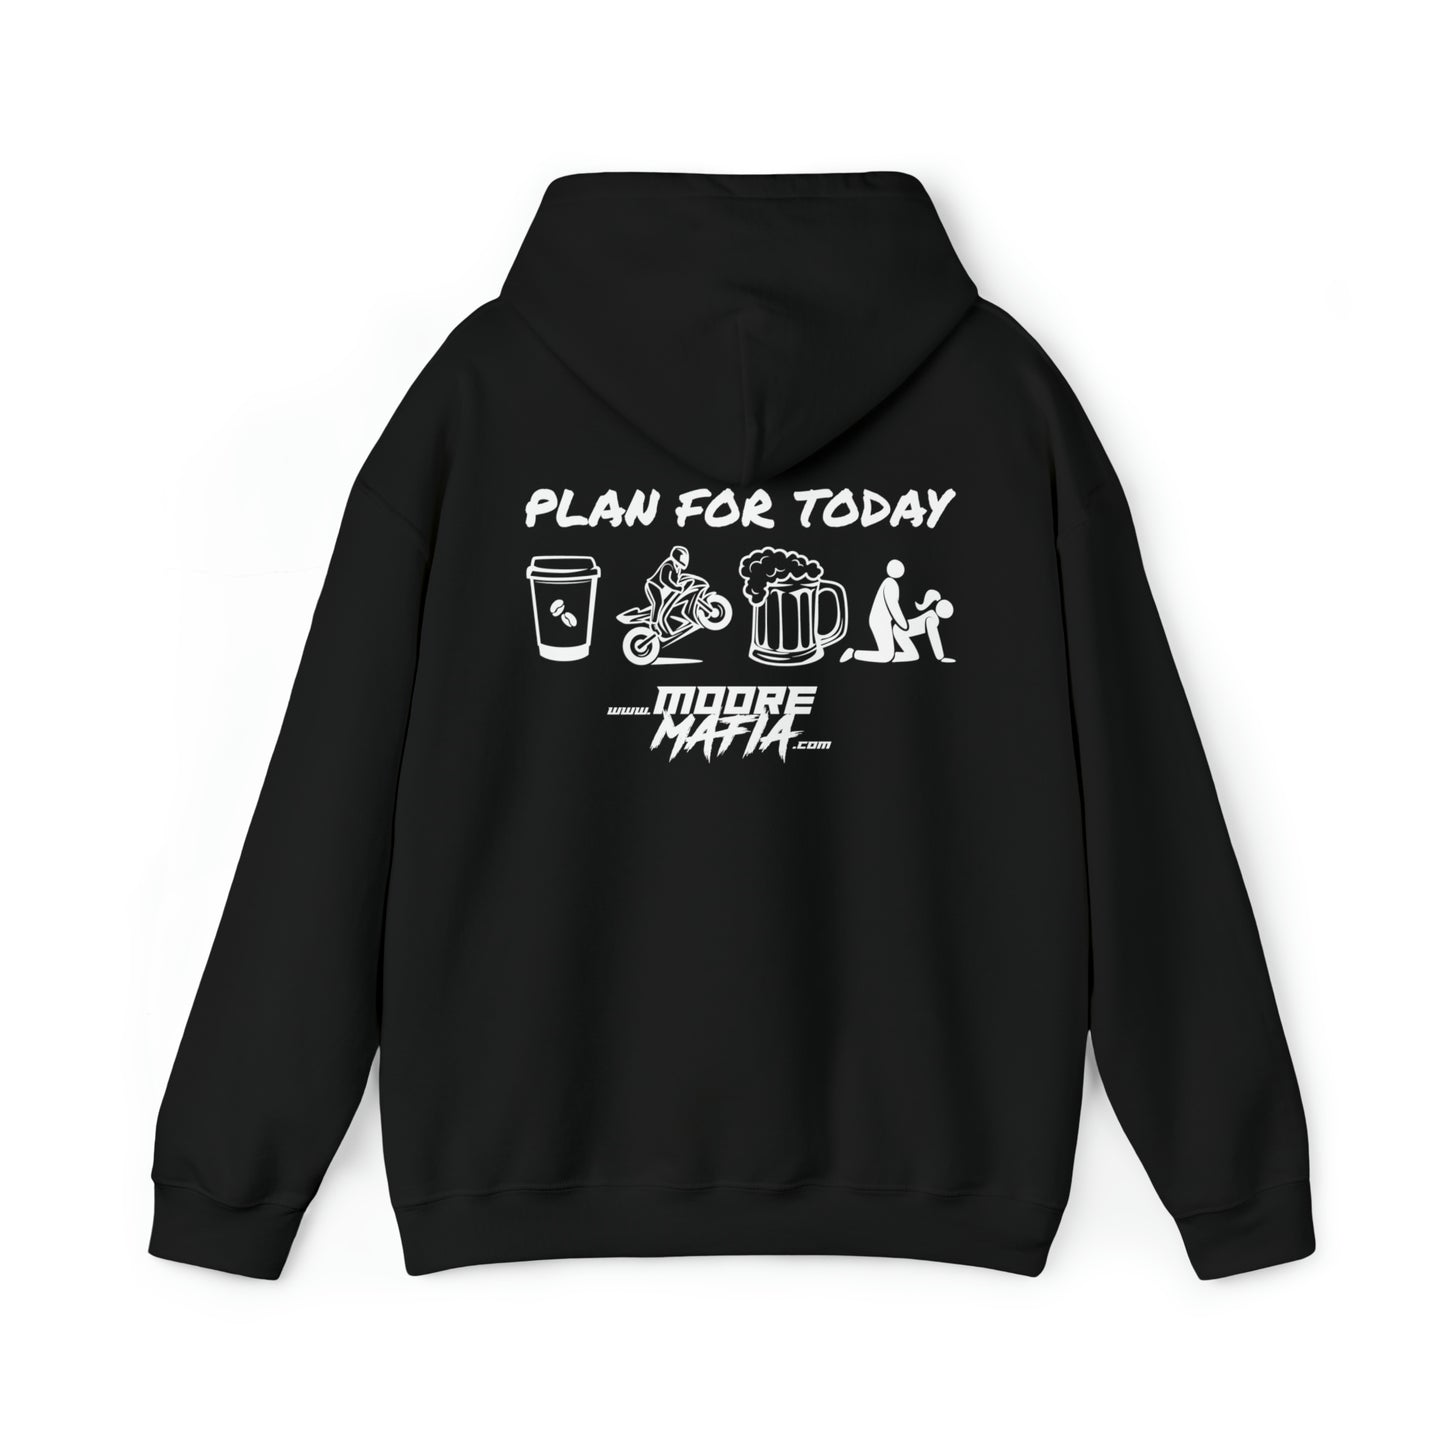 Plan For Today Layered Hooded Sweatshirt